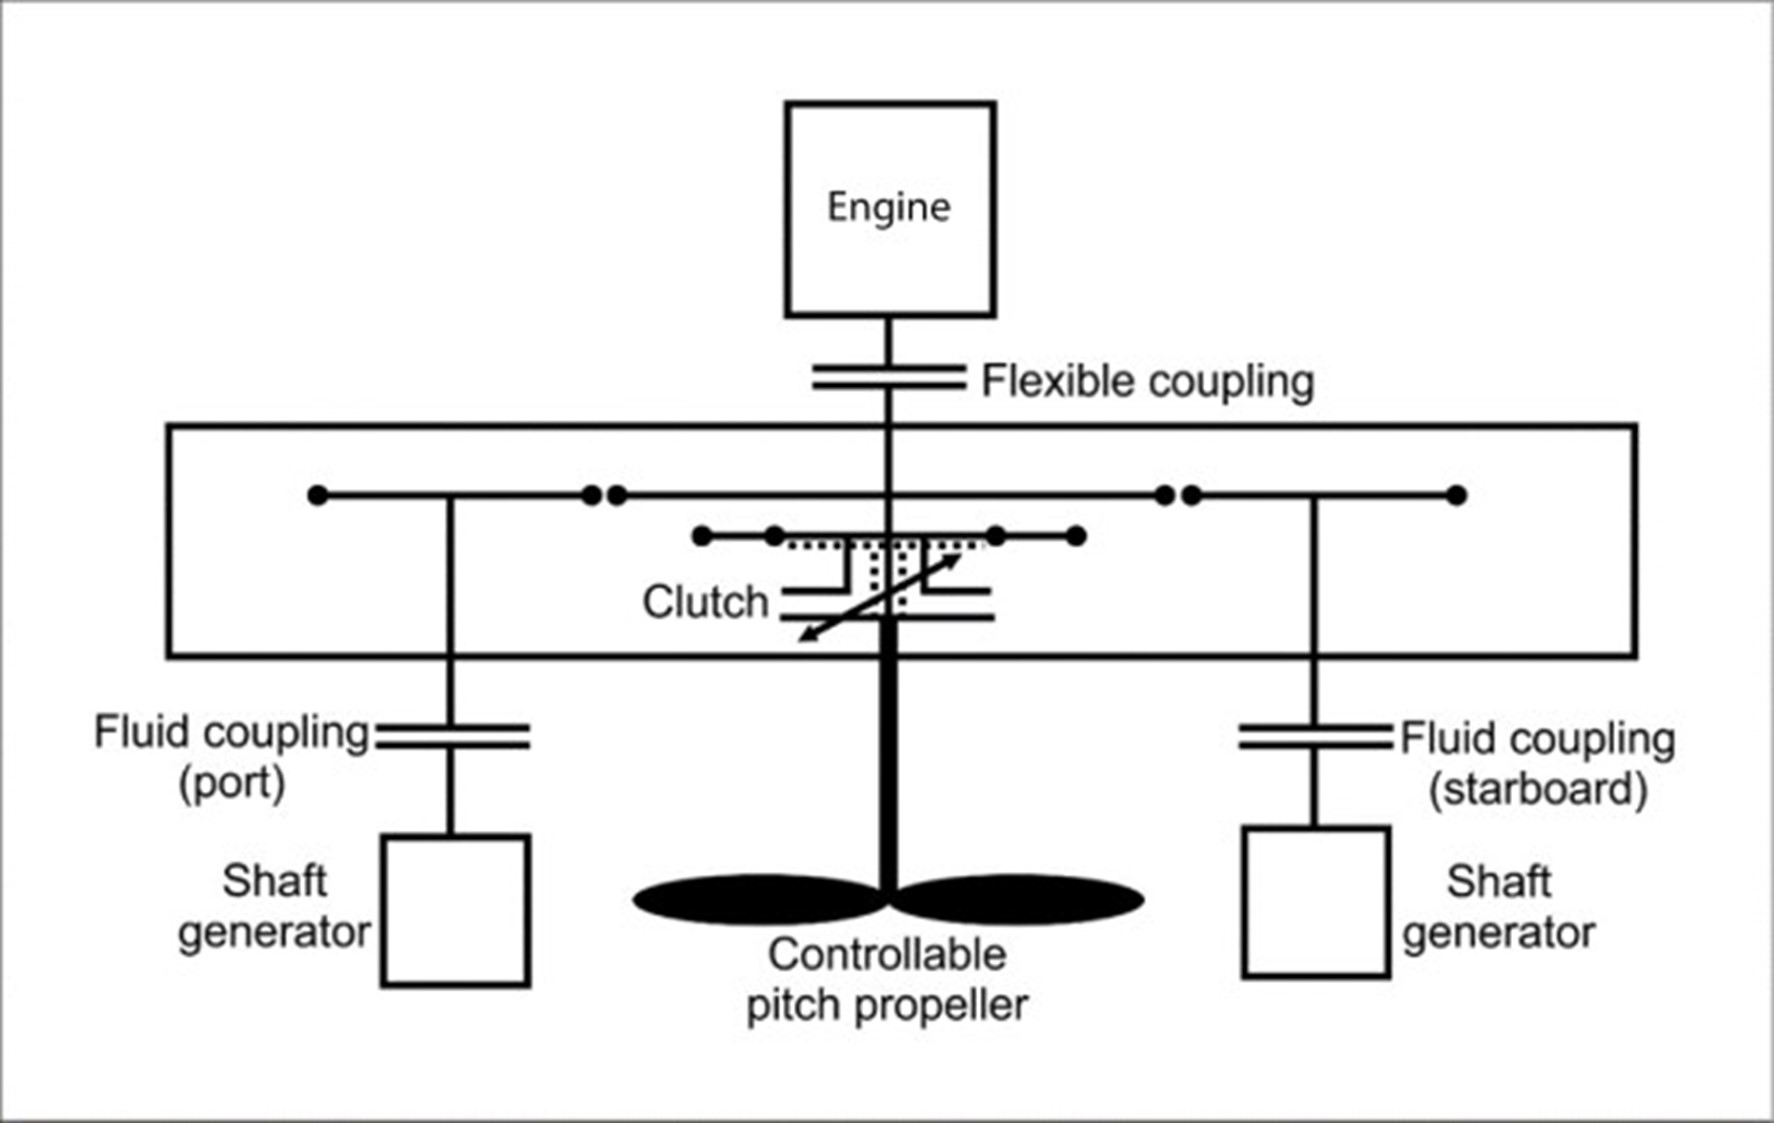 The configuration of the engine, shaft generators, and controllable-pitch propeller (Source: TSB)